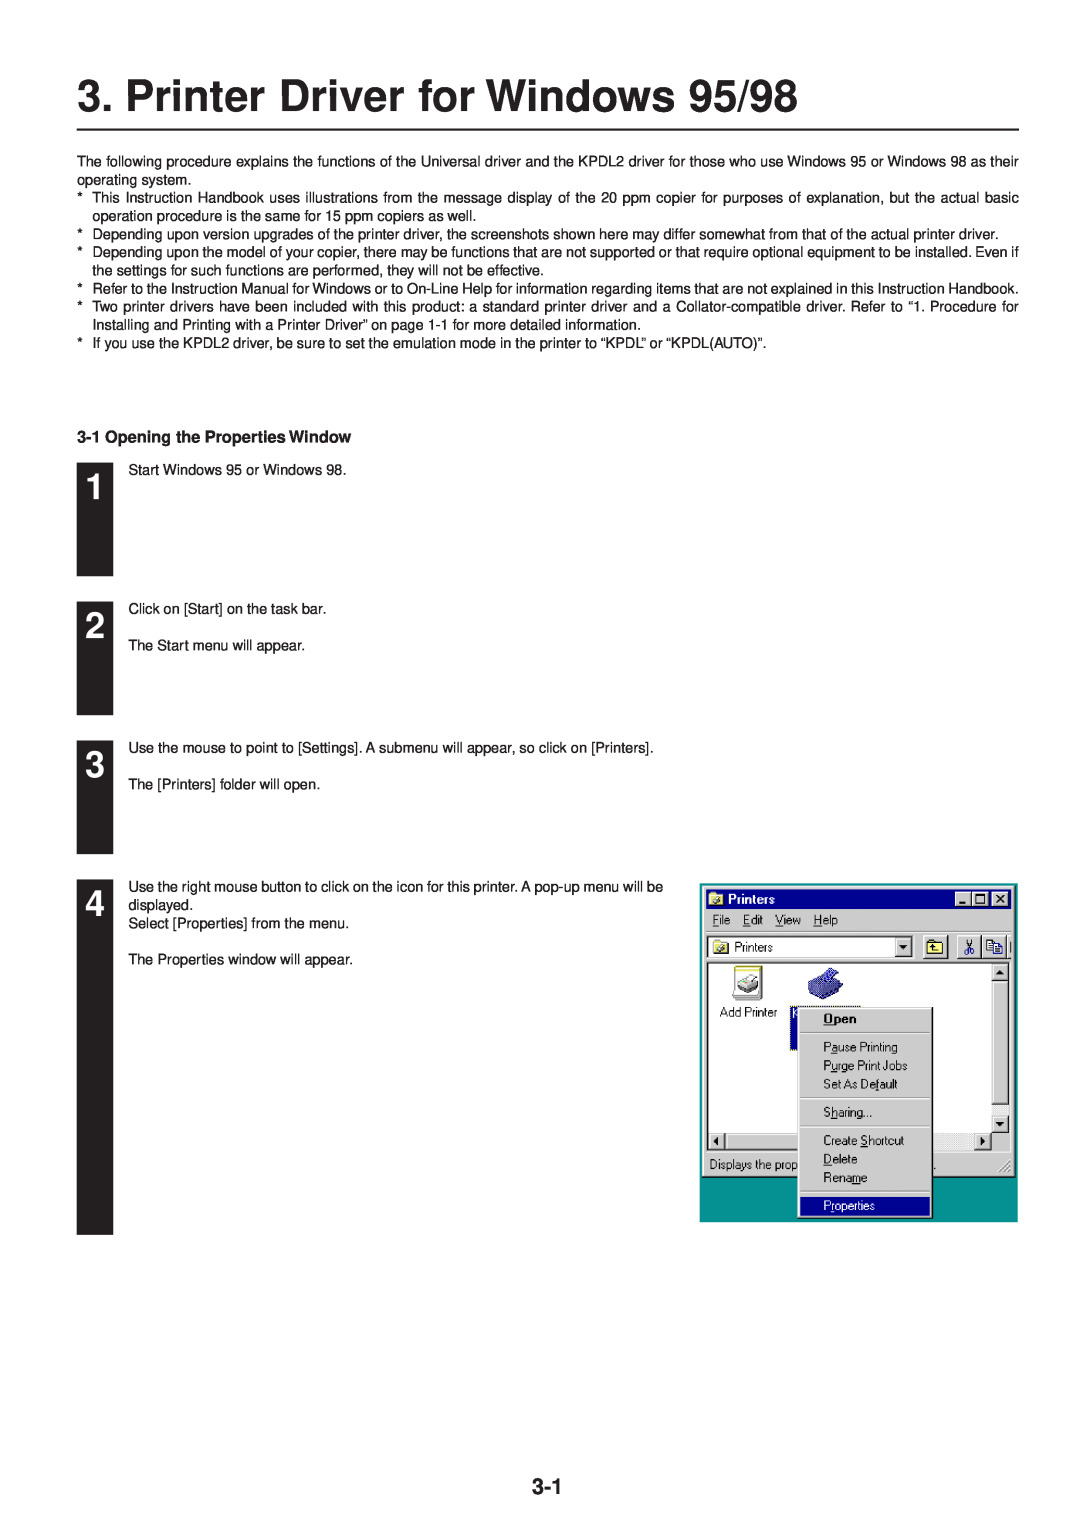 IBM Printing System manual Printer Driver for Windows 95/98, Opening the Properties Window 